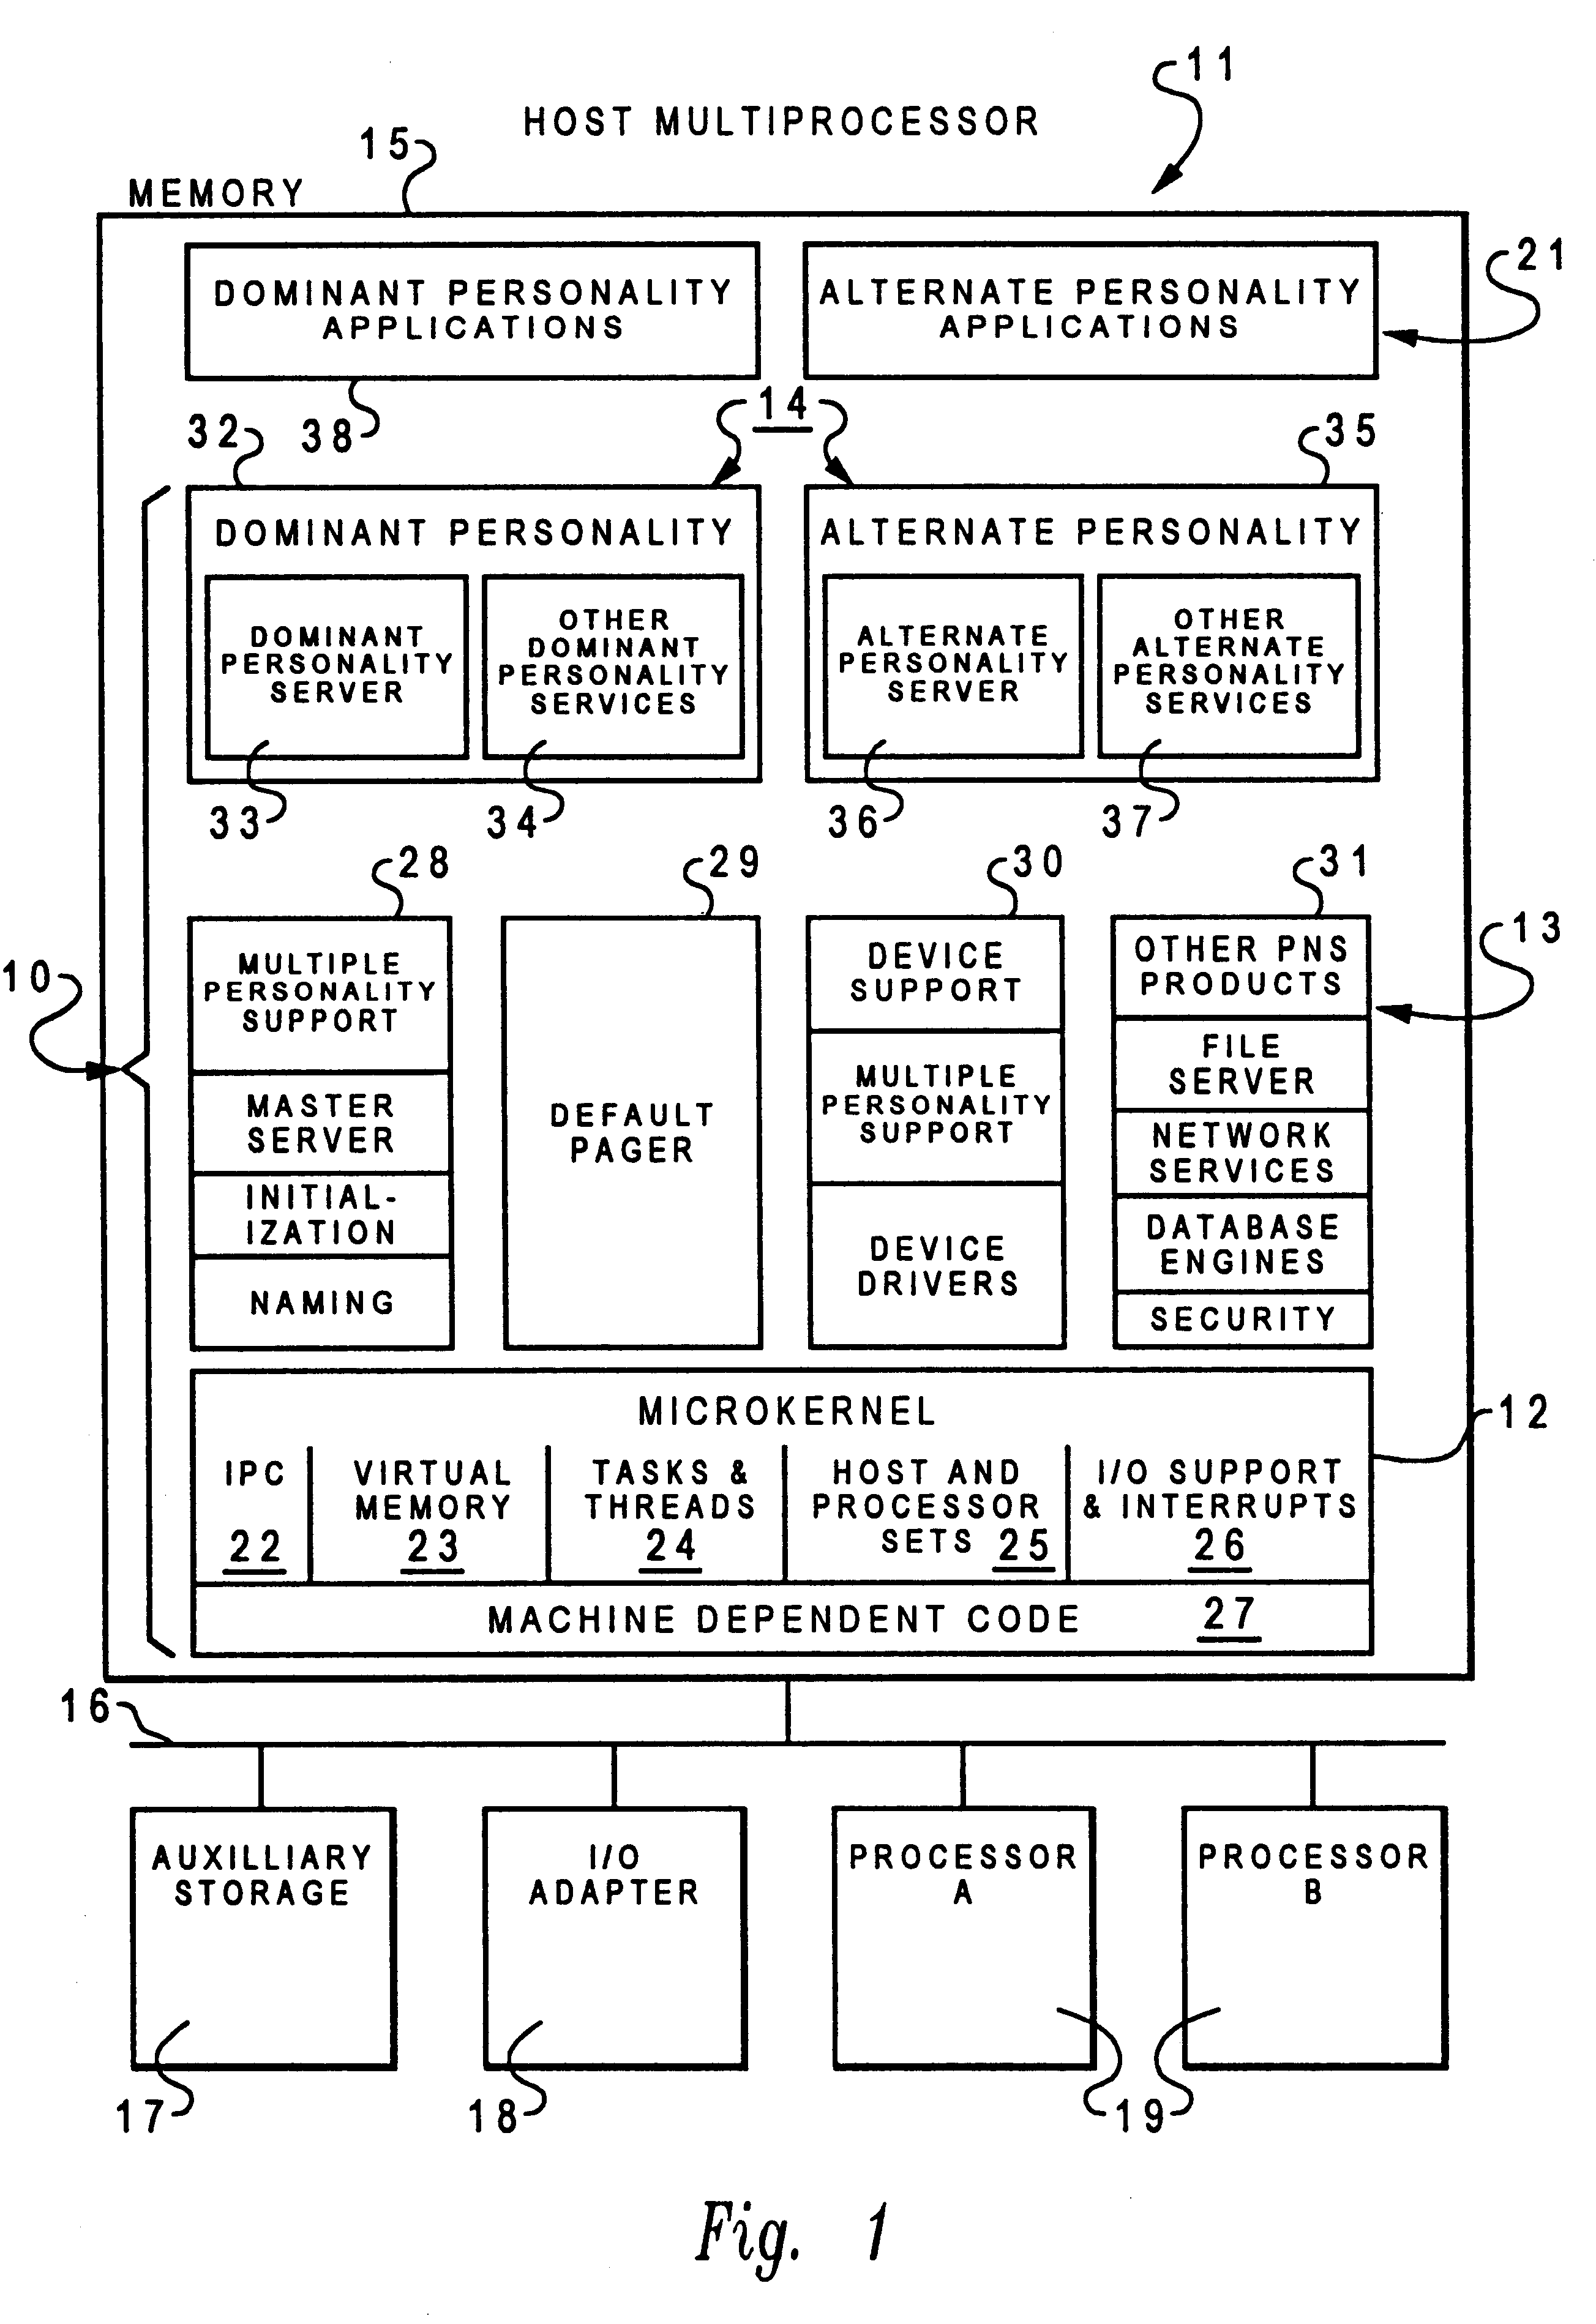 System and method for providing shared global offset table for common shared library in a computer system